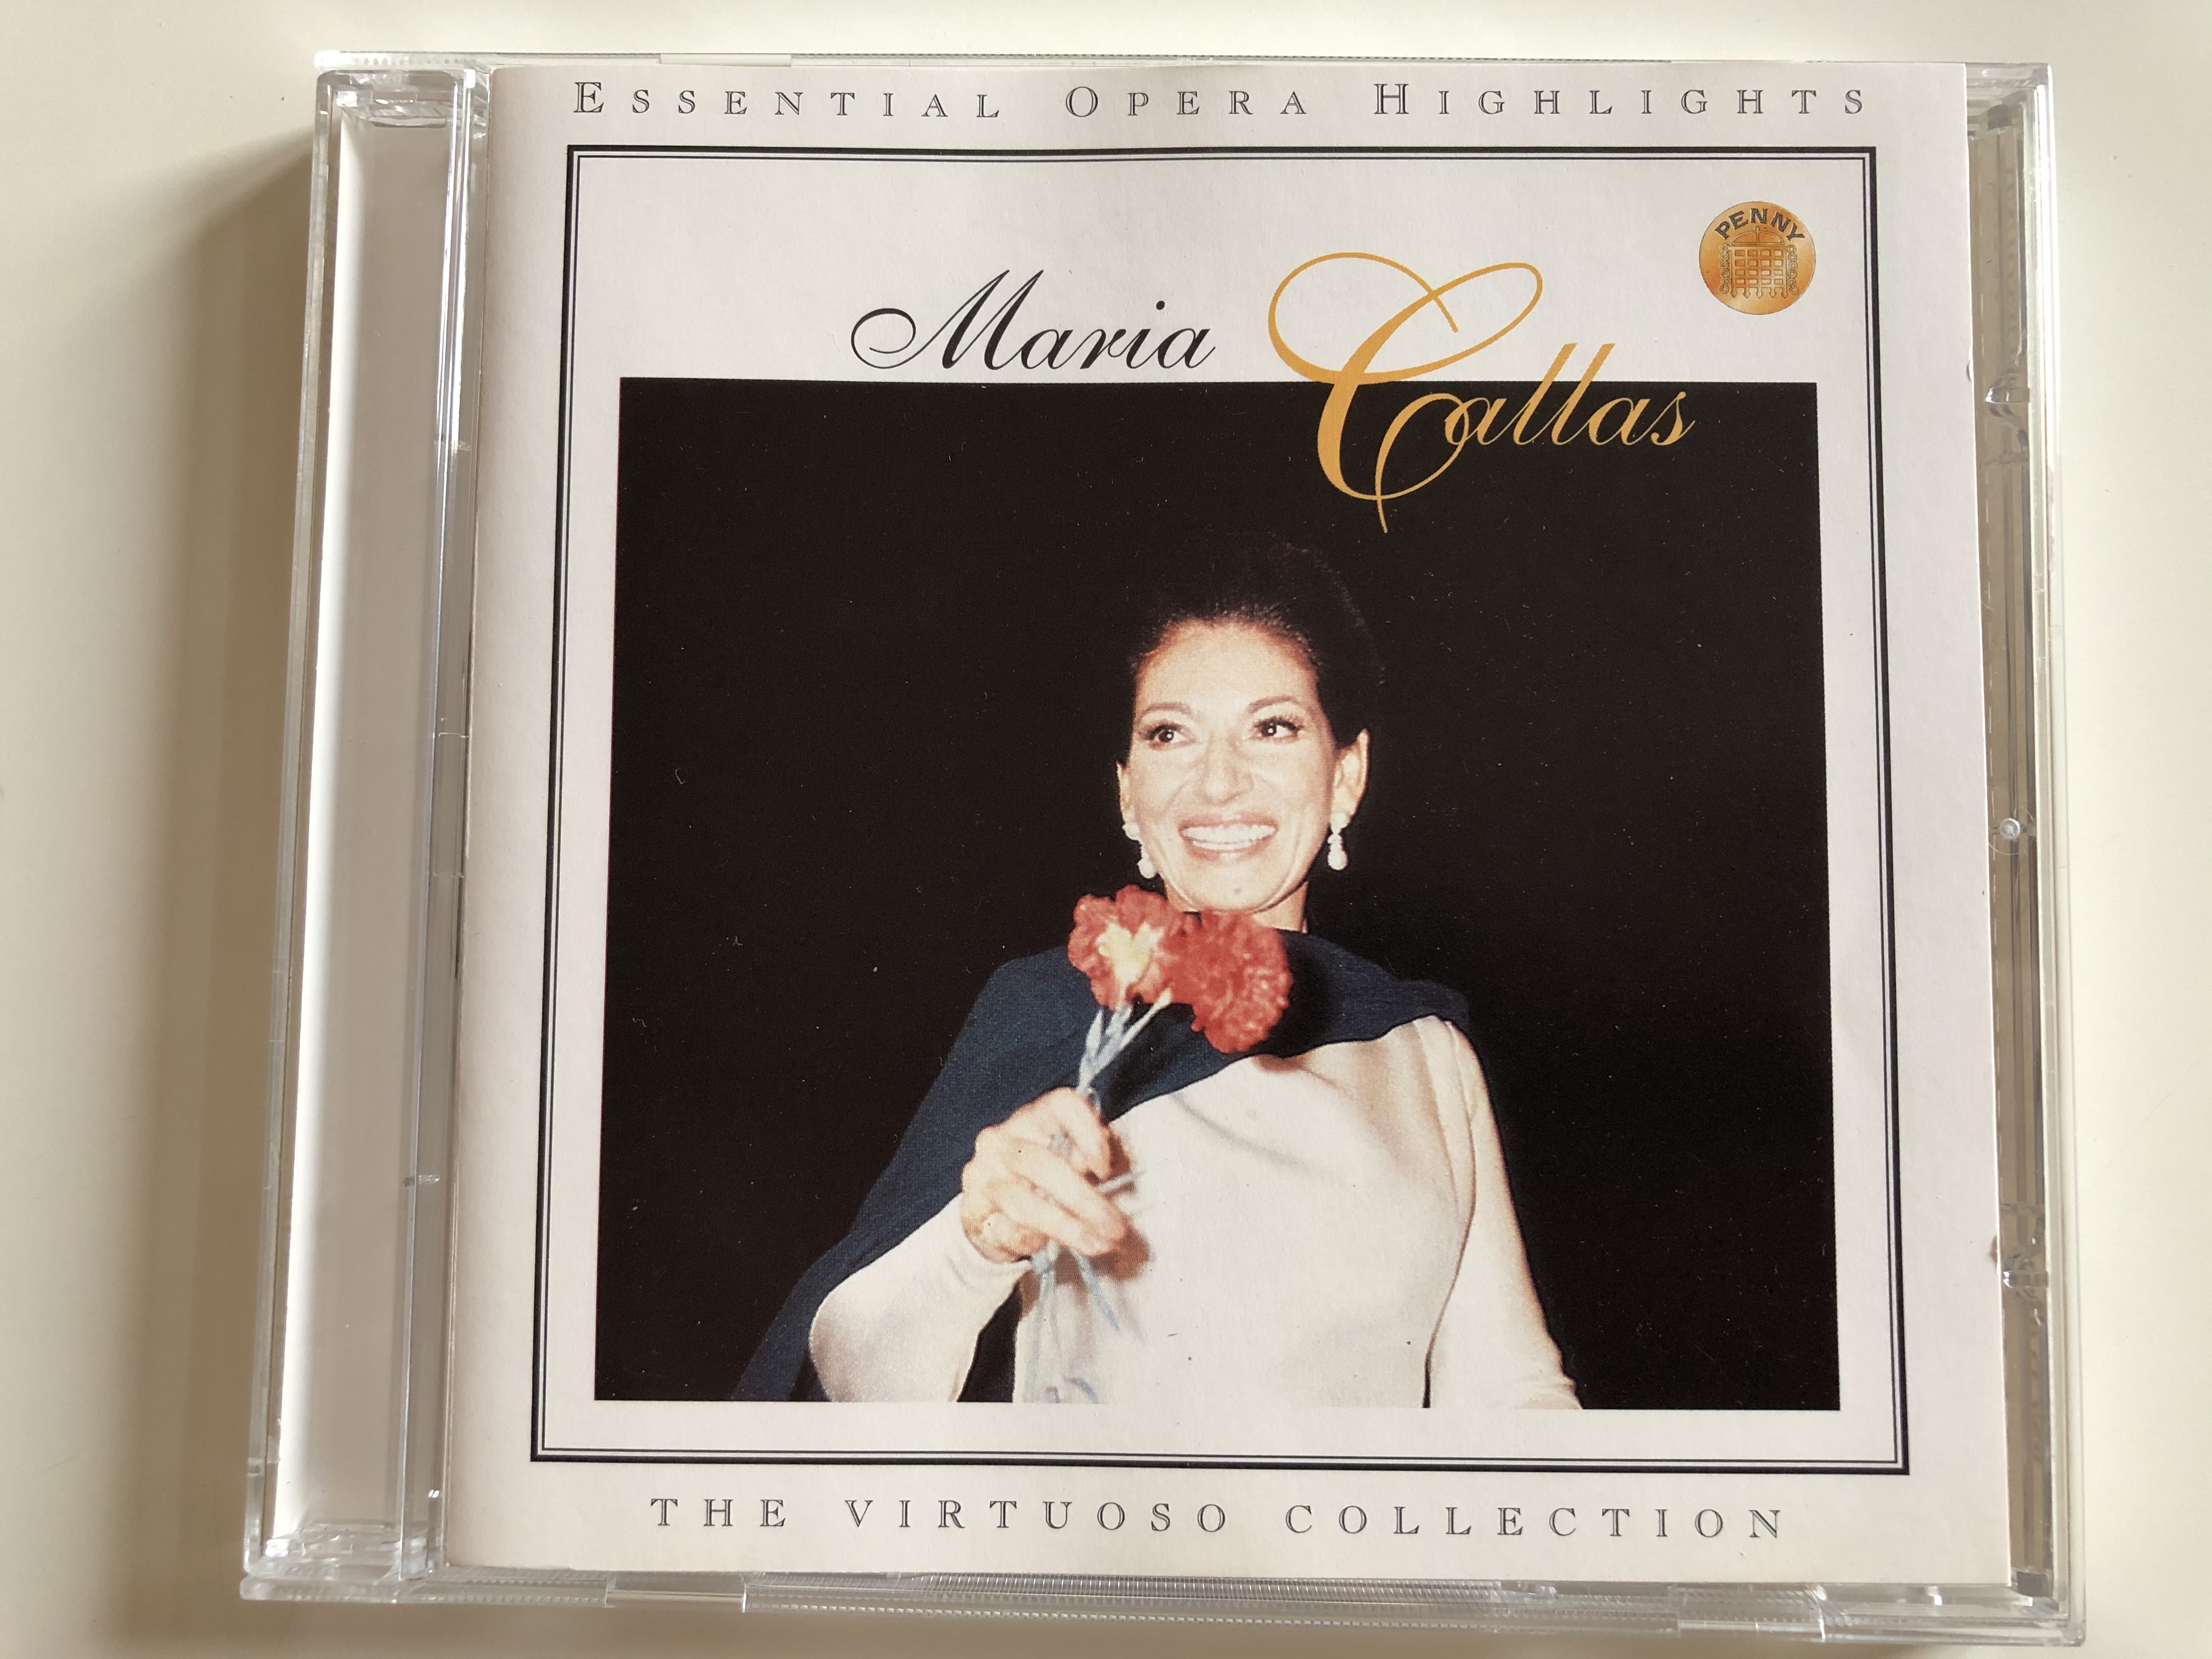 maria-callas-the-virtuoso-collection-essential-opera-highlights-penny-audio-cd-1995-pncd-0101-1-.jpg